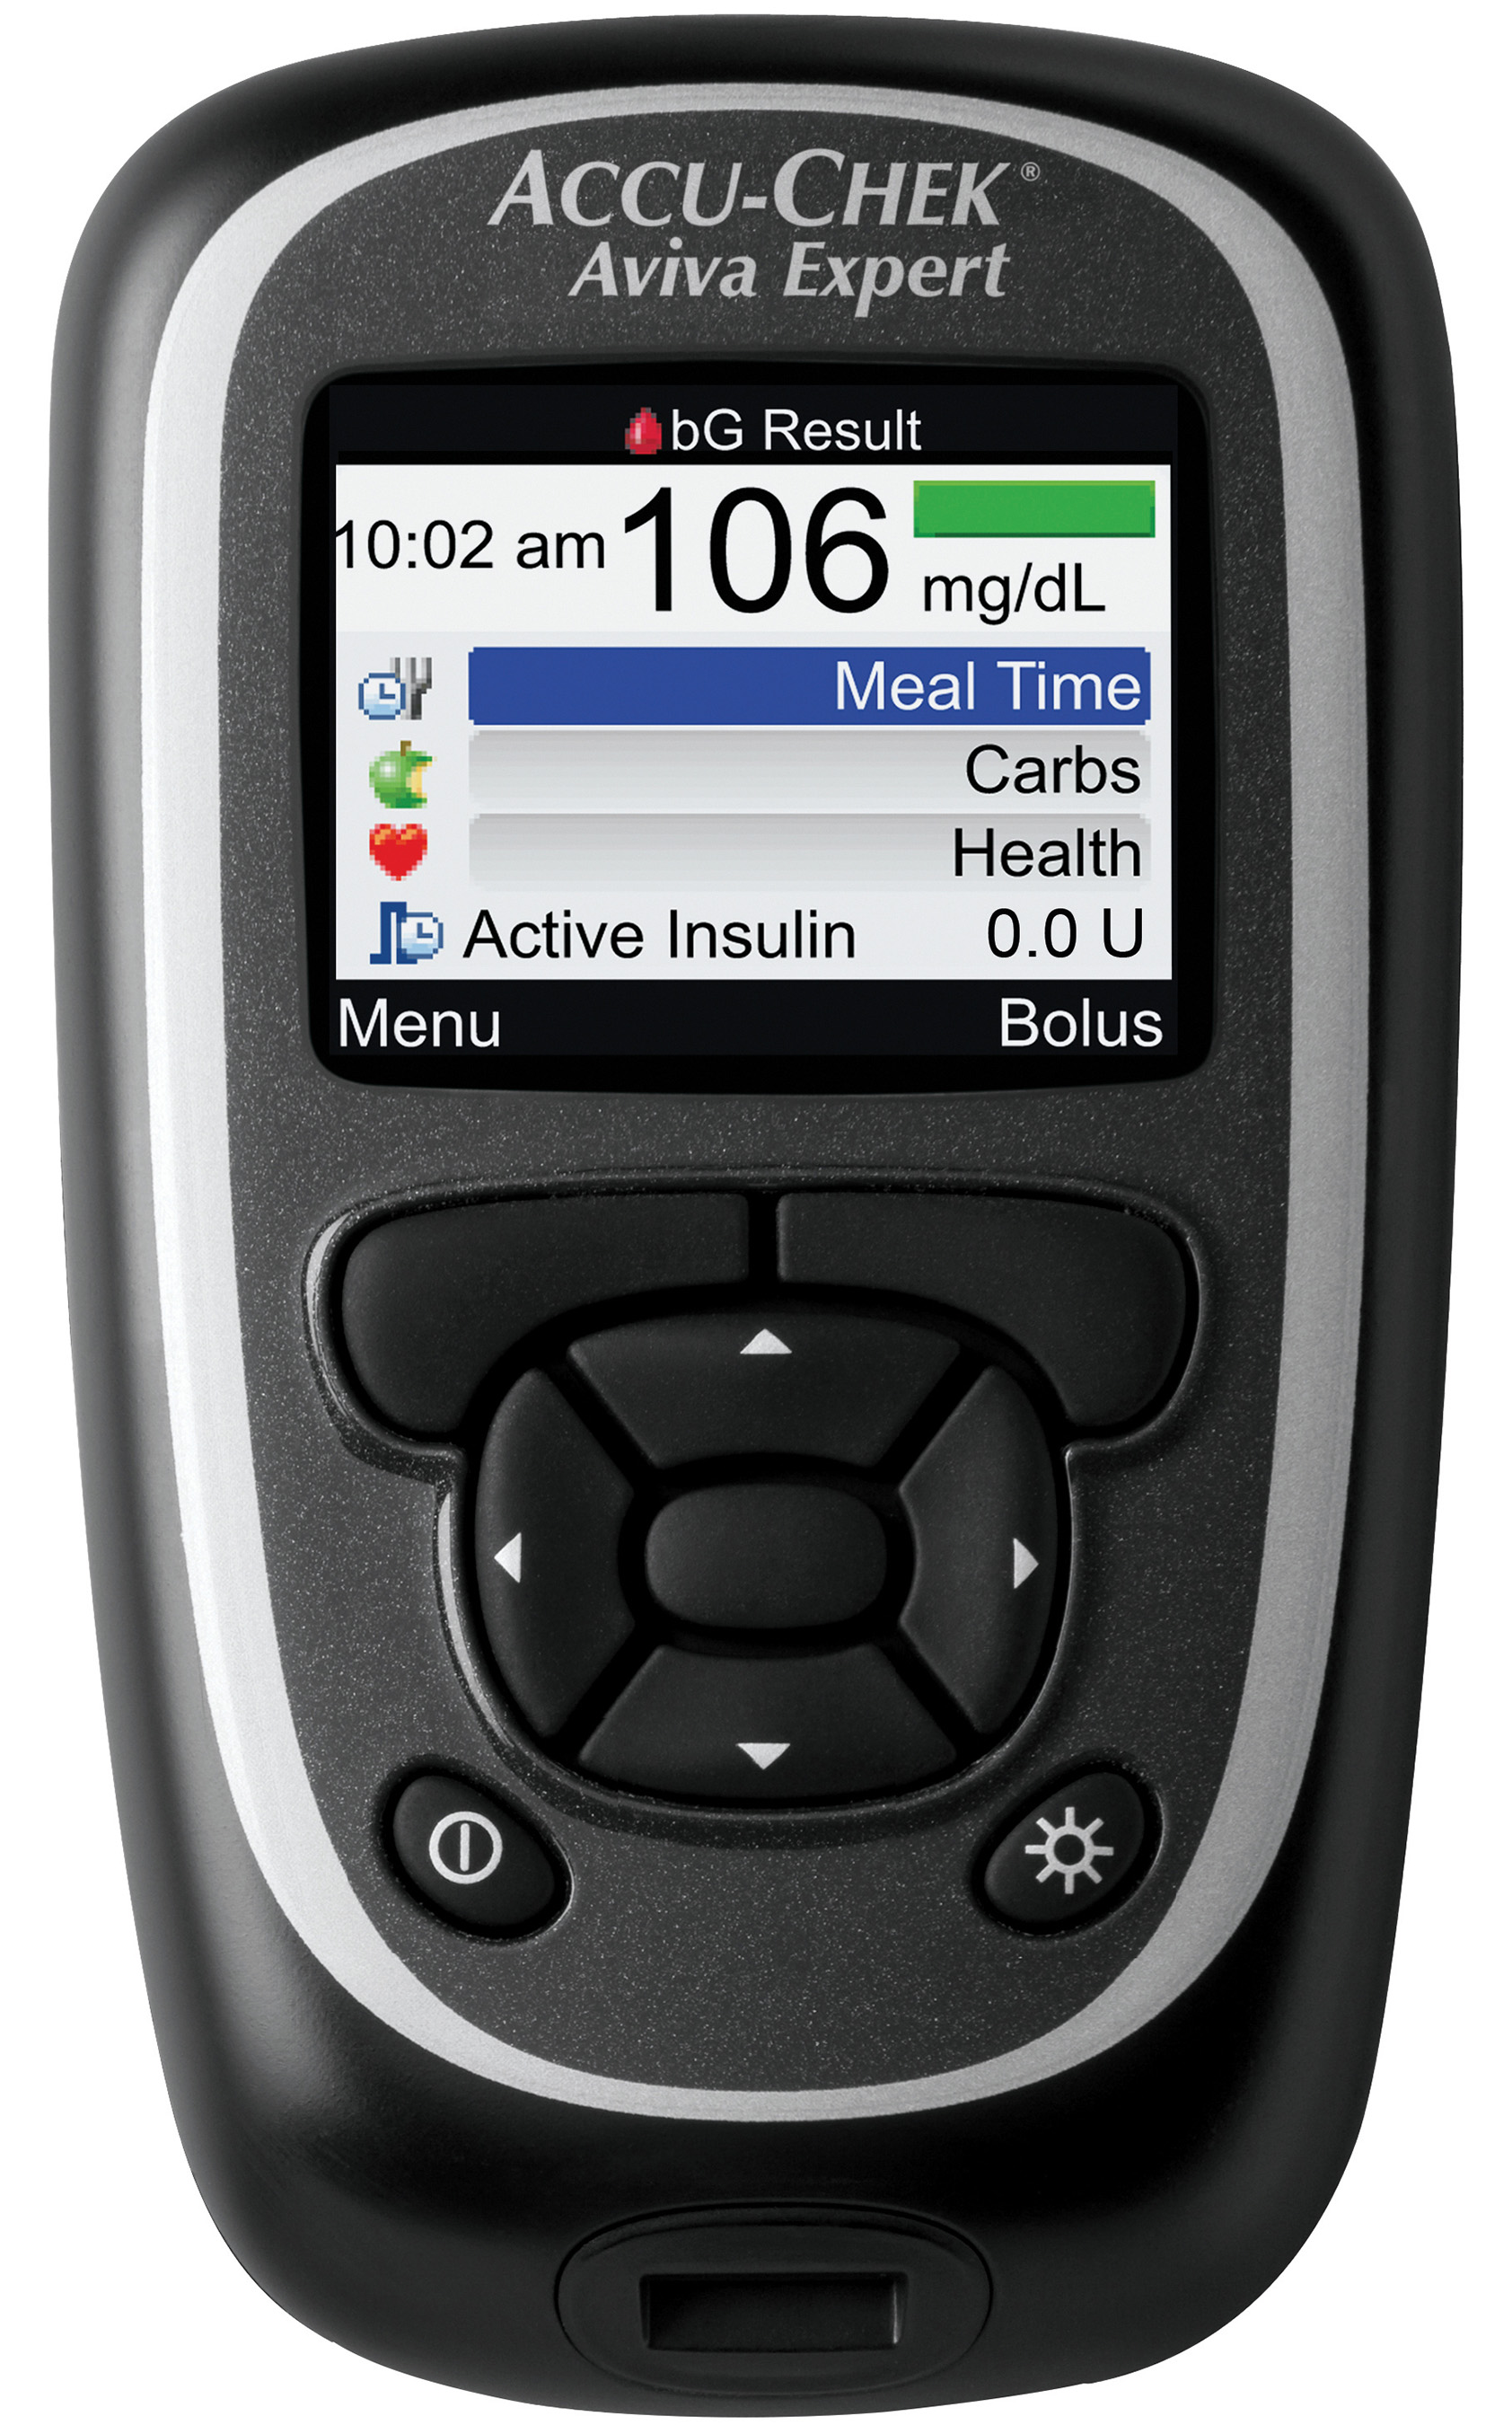 Roche’s ACCU-CHEK® Aviva Expert Innovative Blood Glucose Meter Now Available